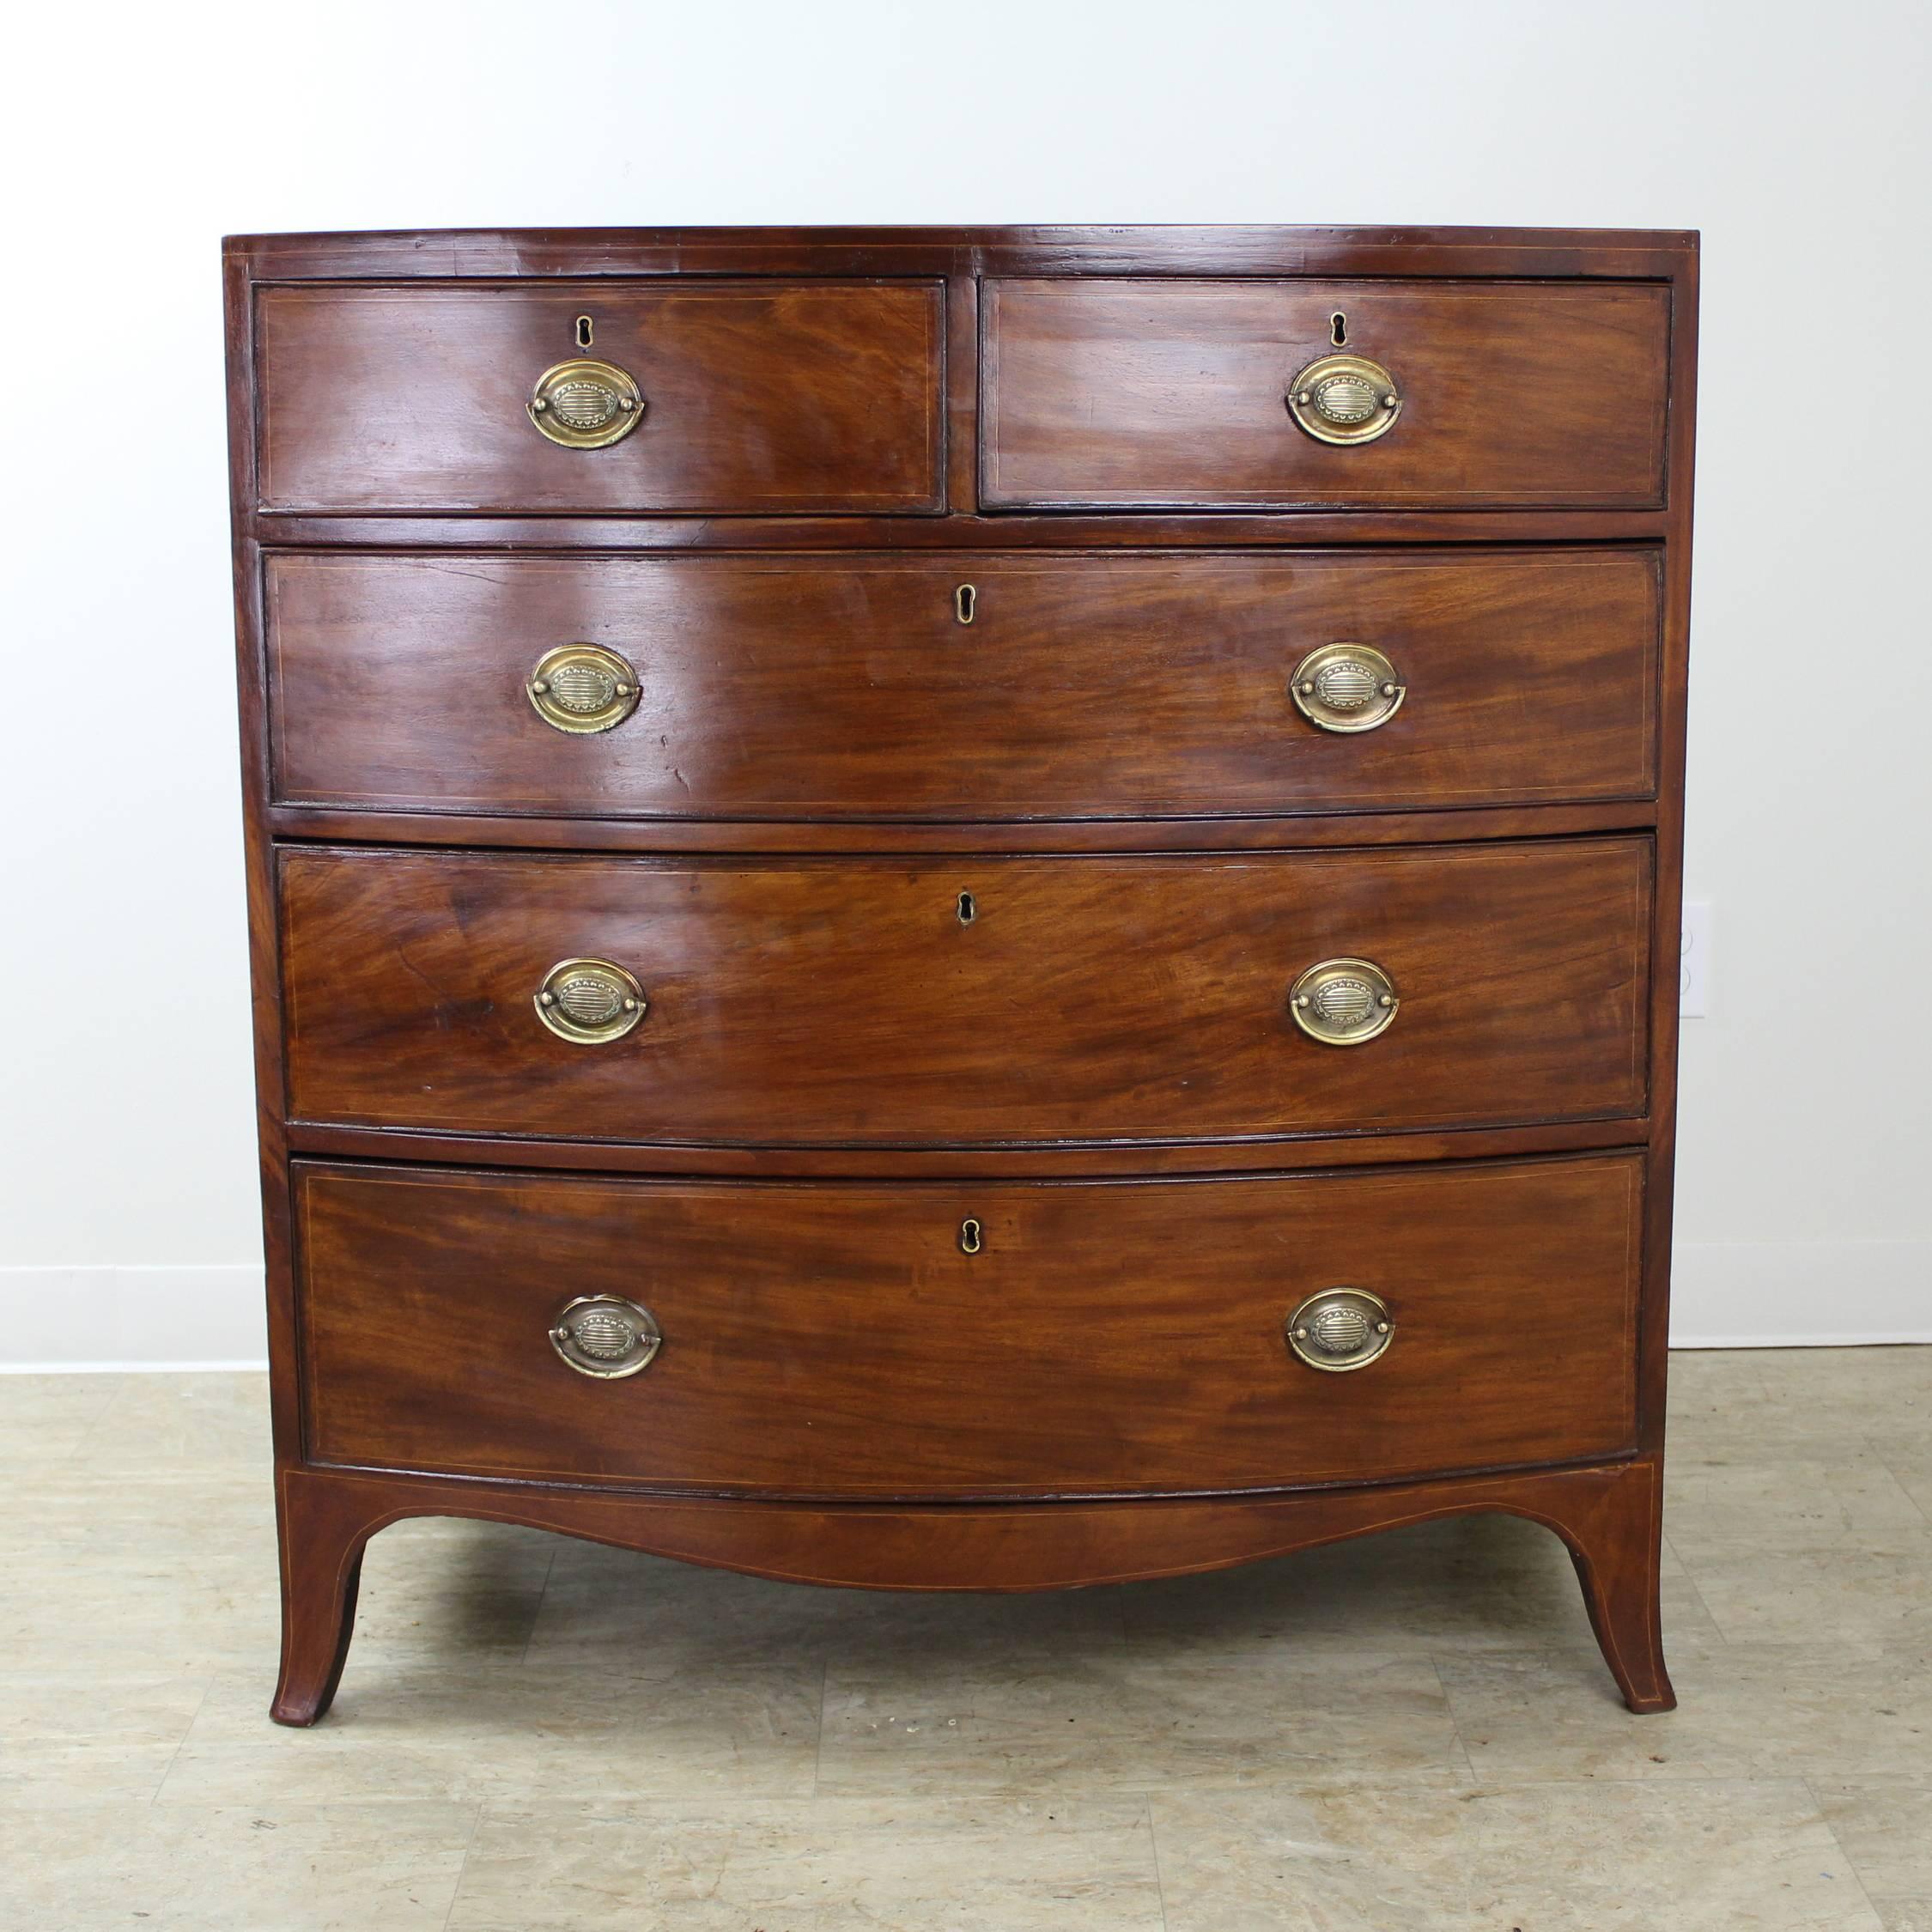 An elegant antique bowfront bureau. The mahogany is a rich medium color with a lovely grain. Details of note include the delicate satinwood stringing, cockbeading on the drawers, and beautifully wrought brass drawer pulls. The graceful French style